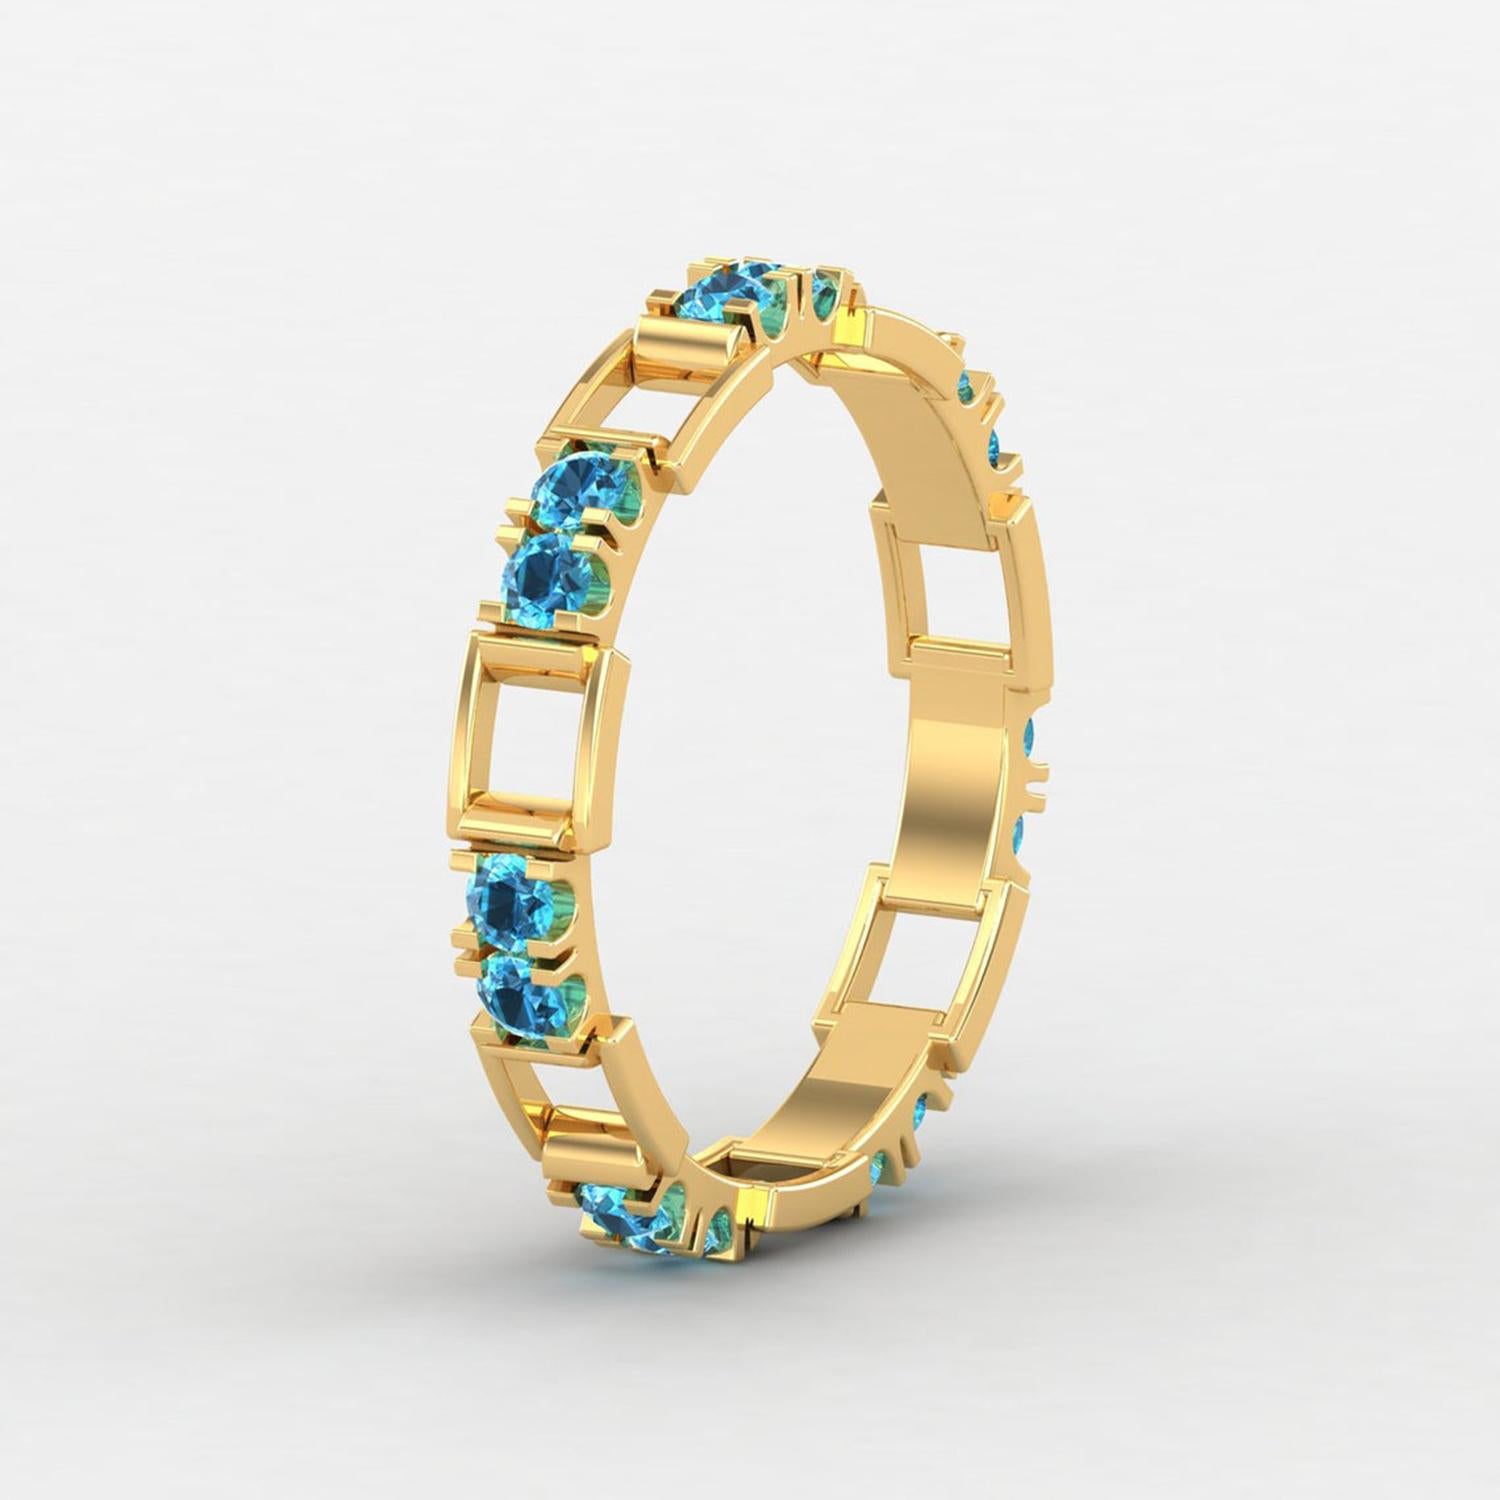 Round Cut 14 Karat Gold Round Swiss Blue Topaz Ring / Gold Engagement Ring / Ring for Her For Sale